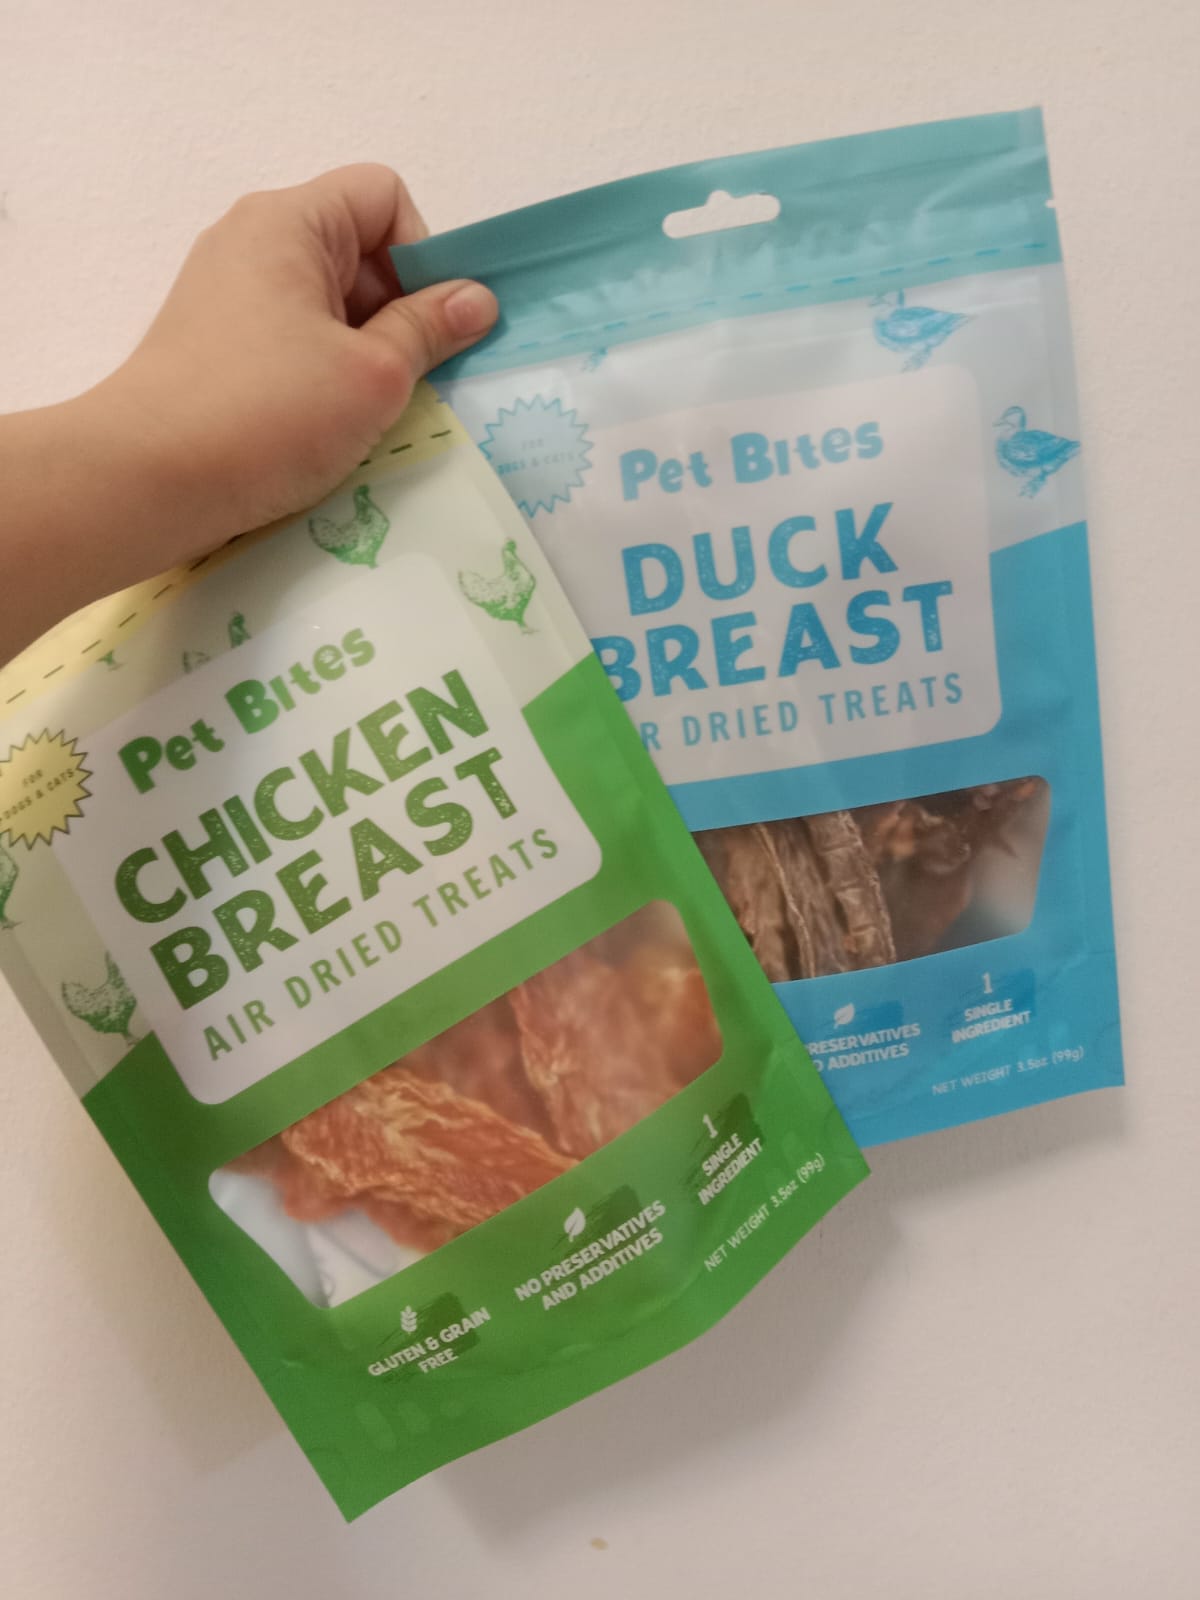 Pet Bites Air Dried Treats for Dogs and Cats